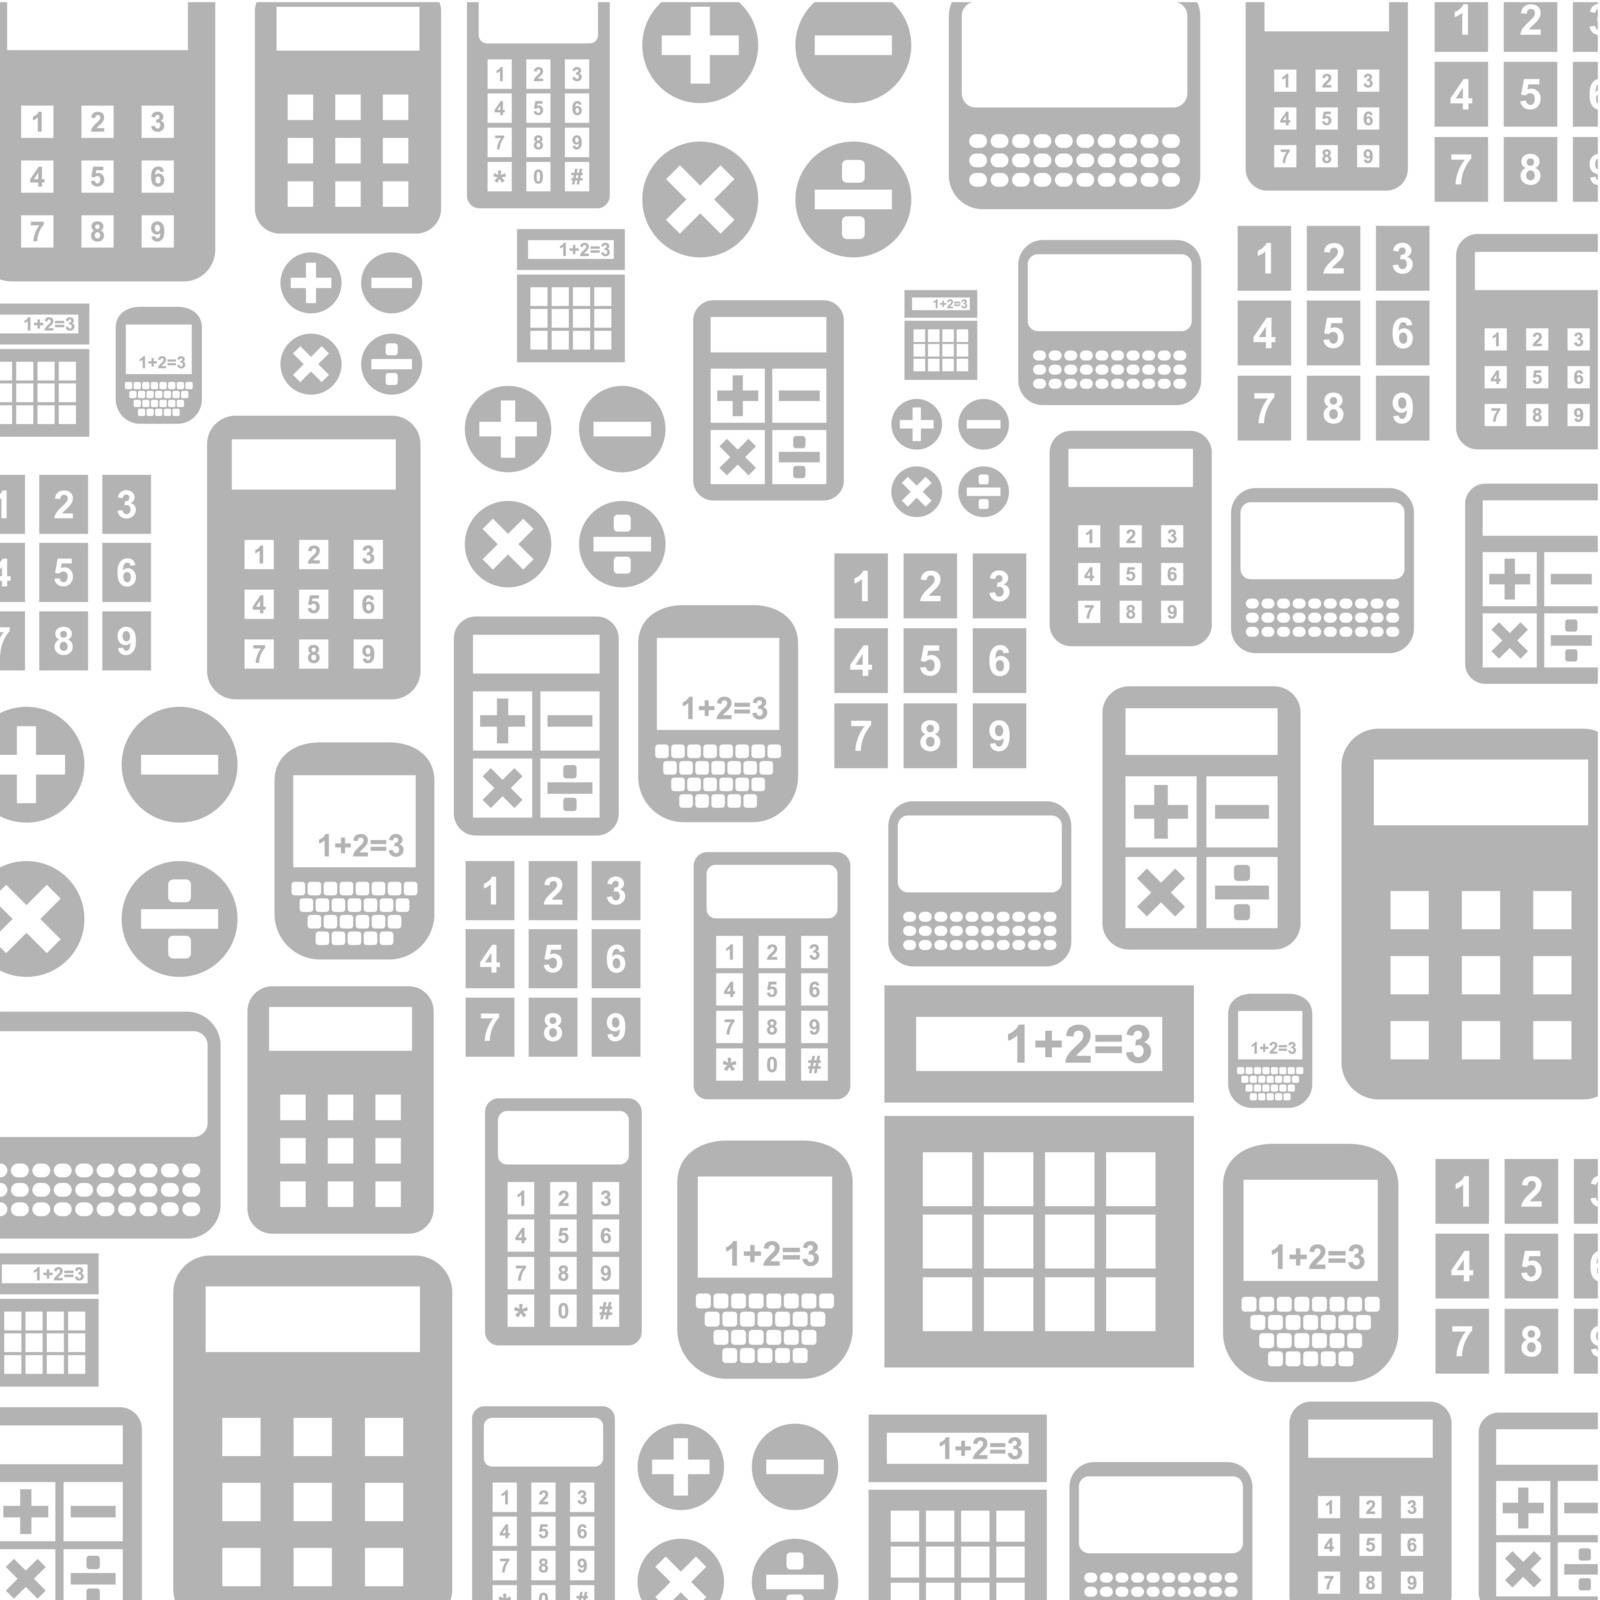 Background made of the calculator. A vector illustration